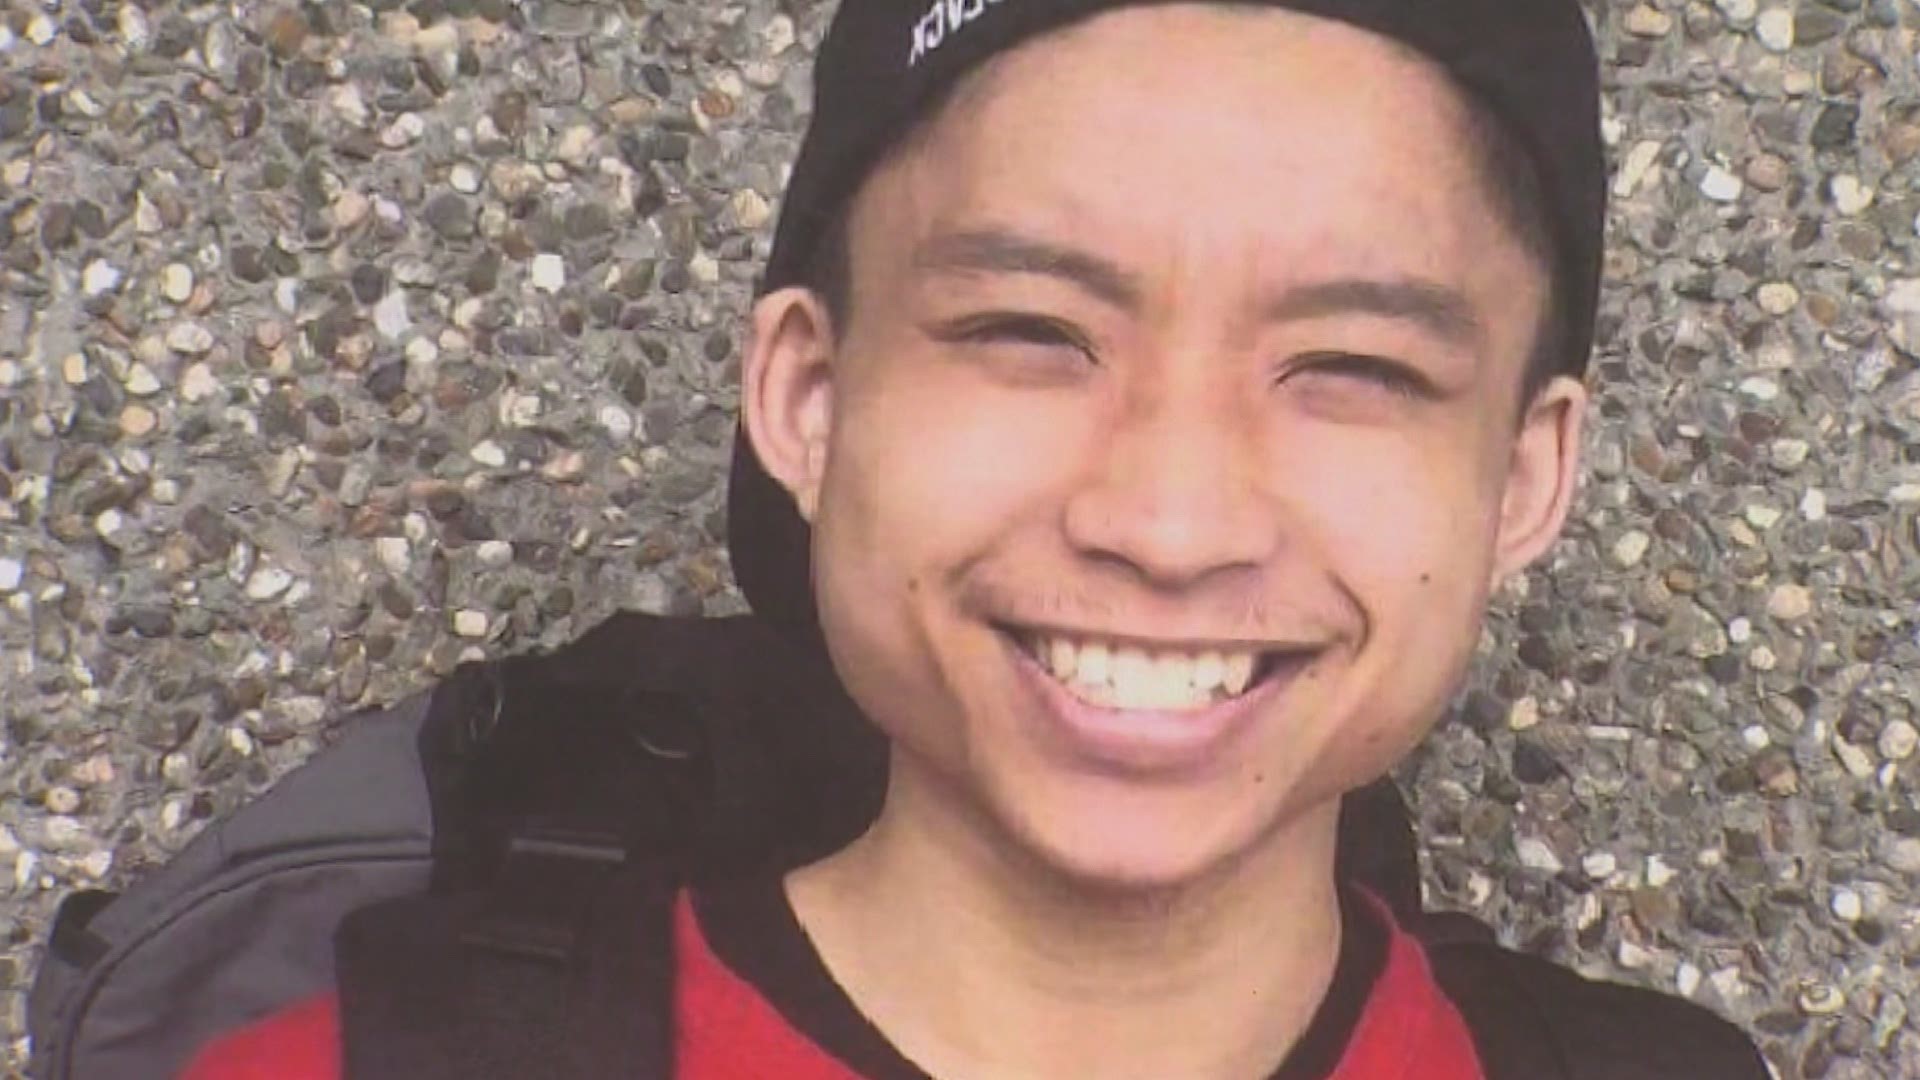 King County will pay $5 million to the estate of Tommy Le to settle a civil rights case over the 2017 deputy-involved shooting.